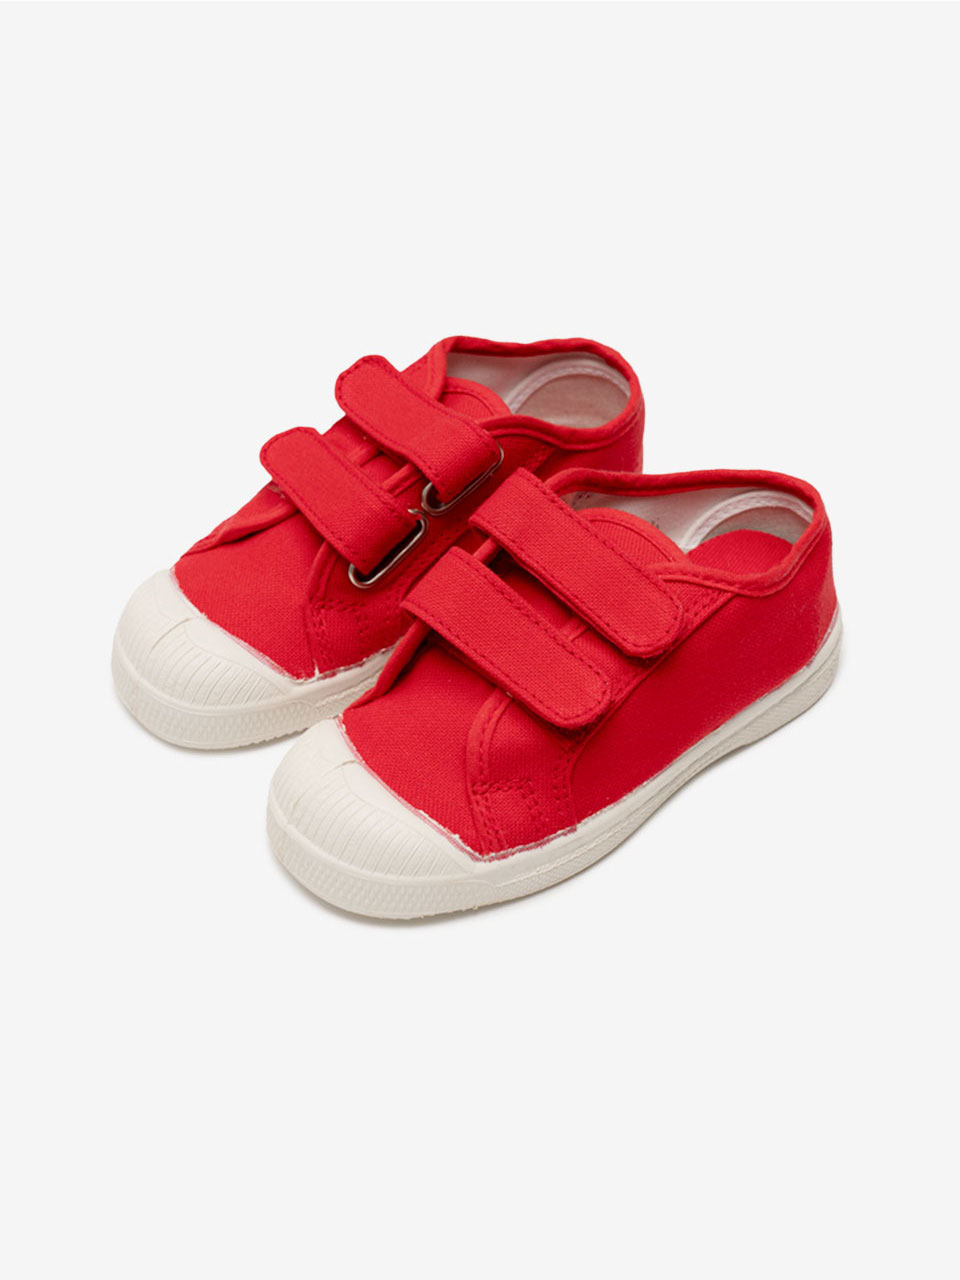 KID LIMITED SCRATCH - RED